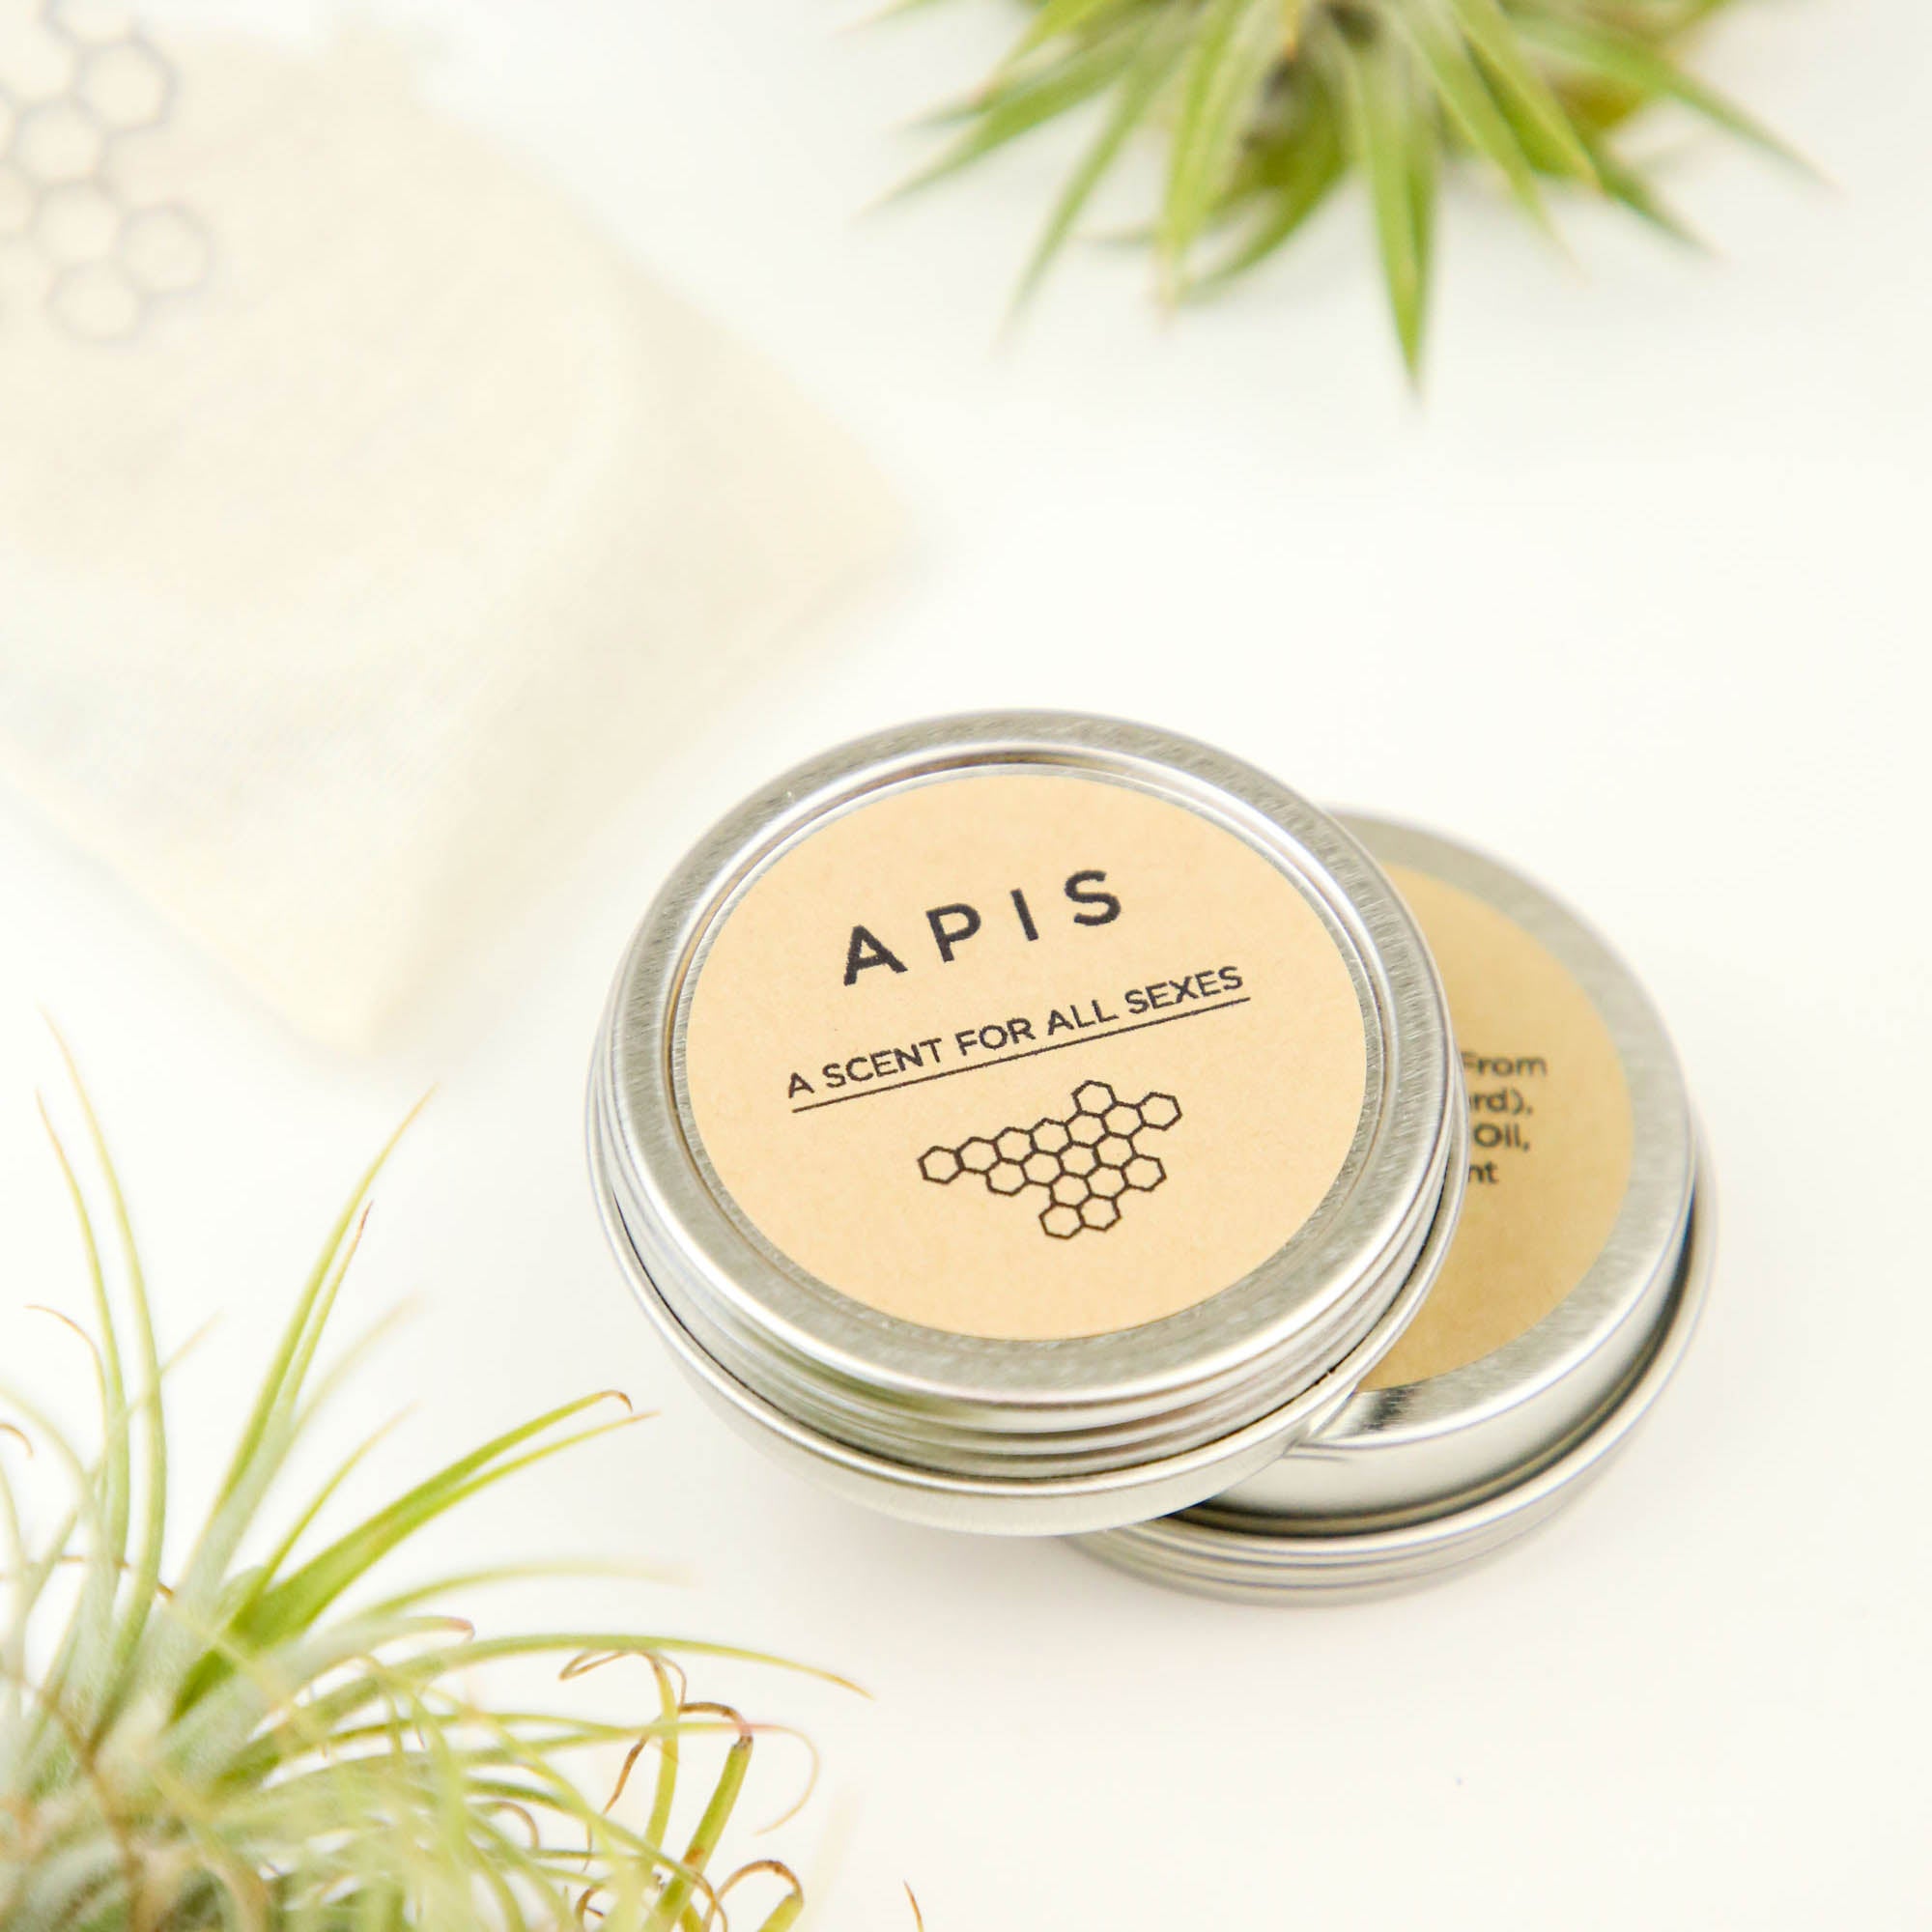 Solid Perfume - APIS, a scent for all sexes